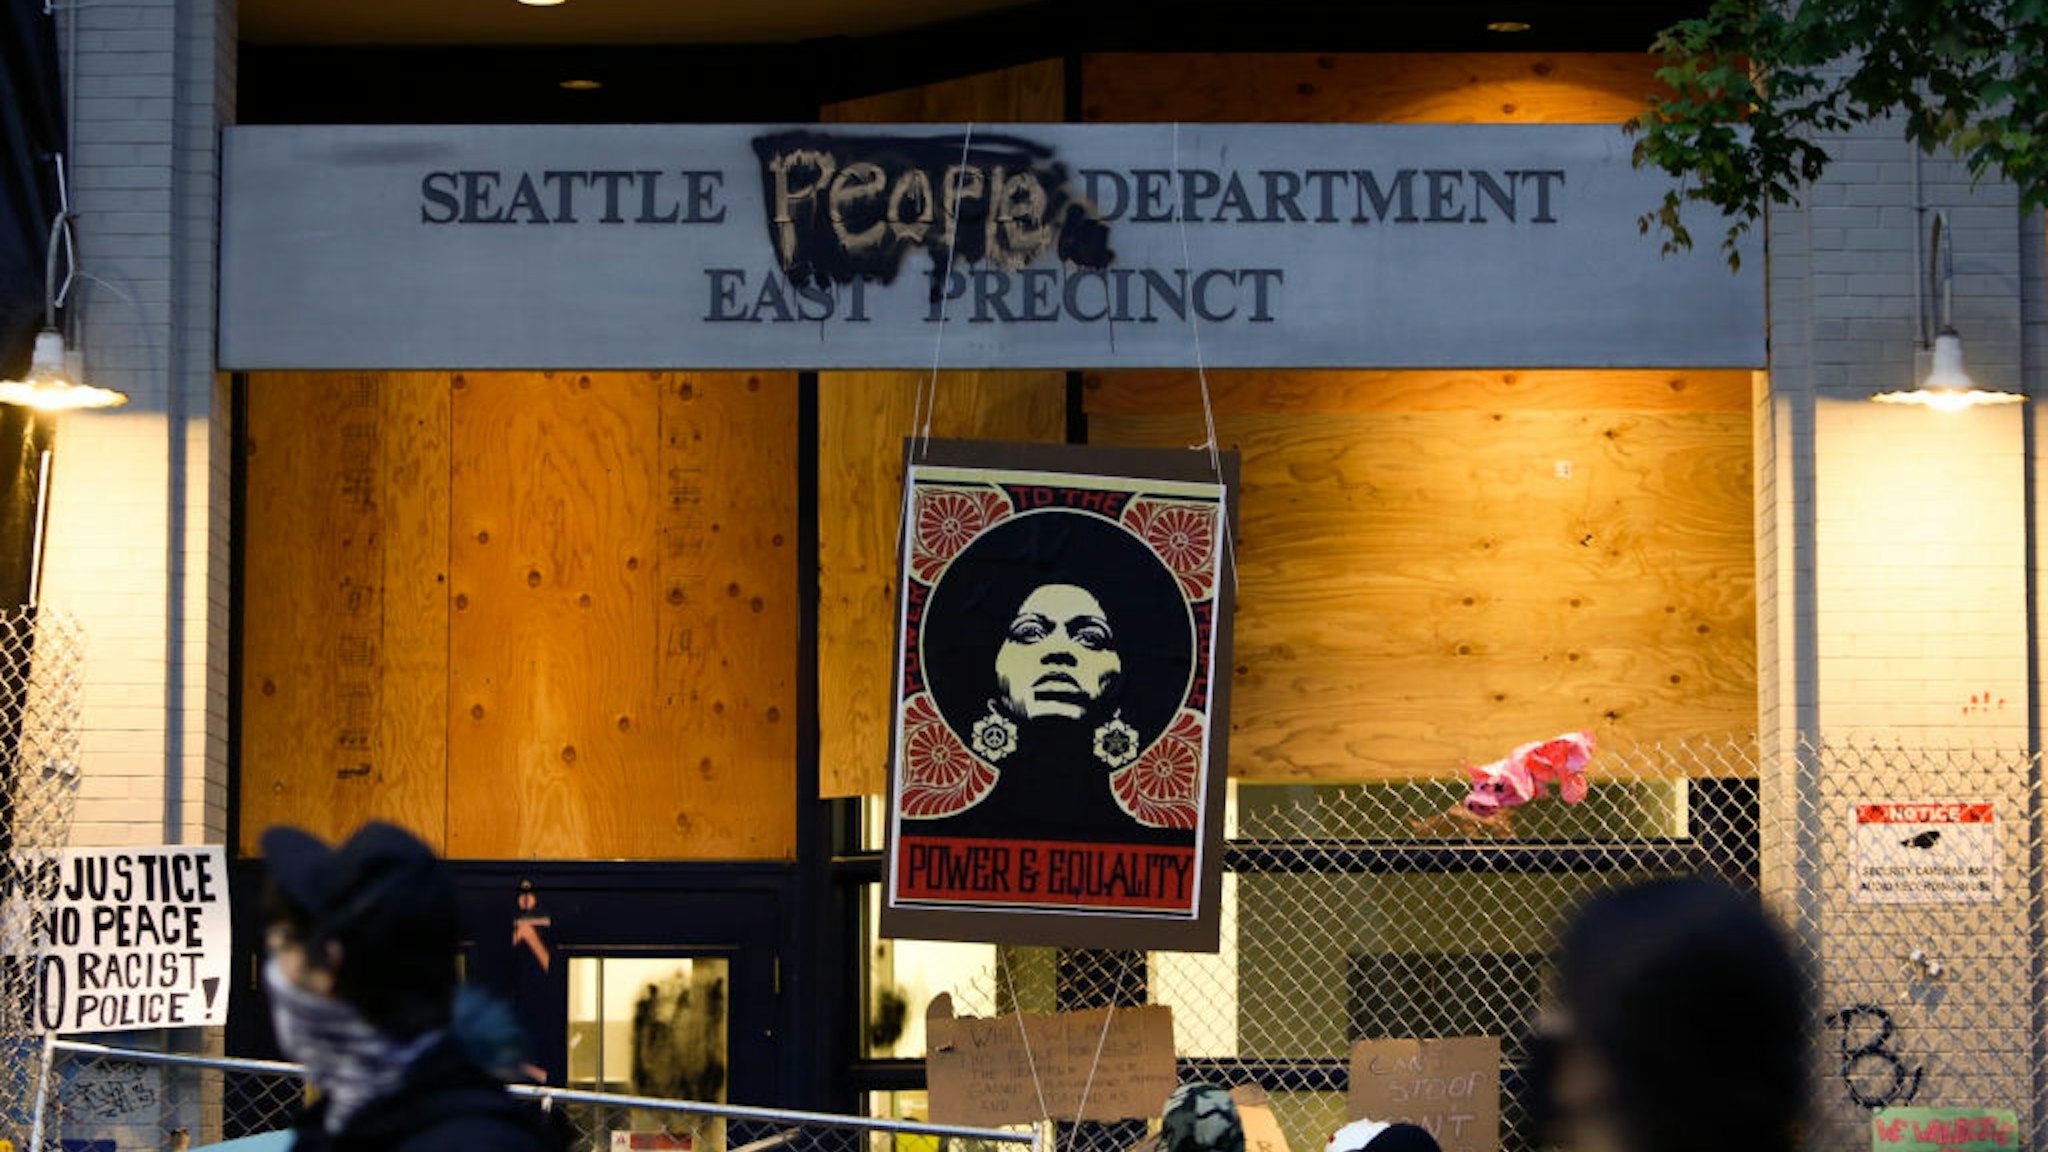 An image of activist Angela Davis is displayed above the entrance to the Seattle Police Department's East Precinct, vacated June 8, and now surrounded by streets reopened to pedestrians forming an area named the Capitol Hill Autonomous Zone (CHAZ) in Seattle, Washington on June 12, 2020.